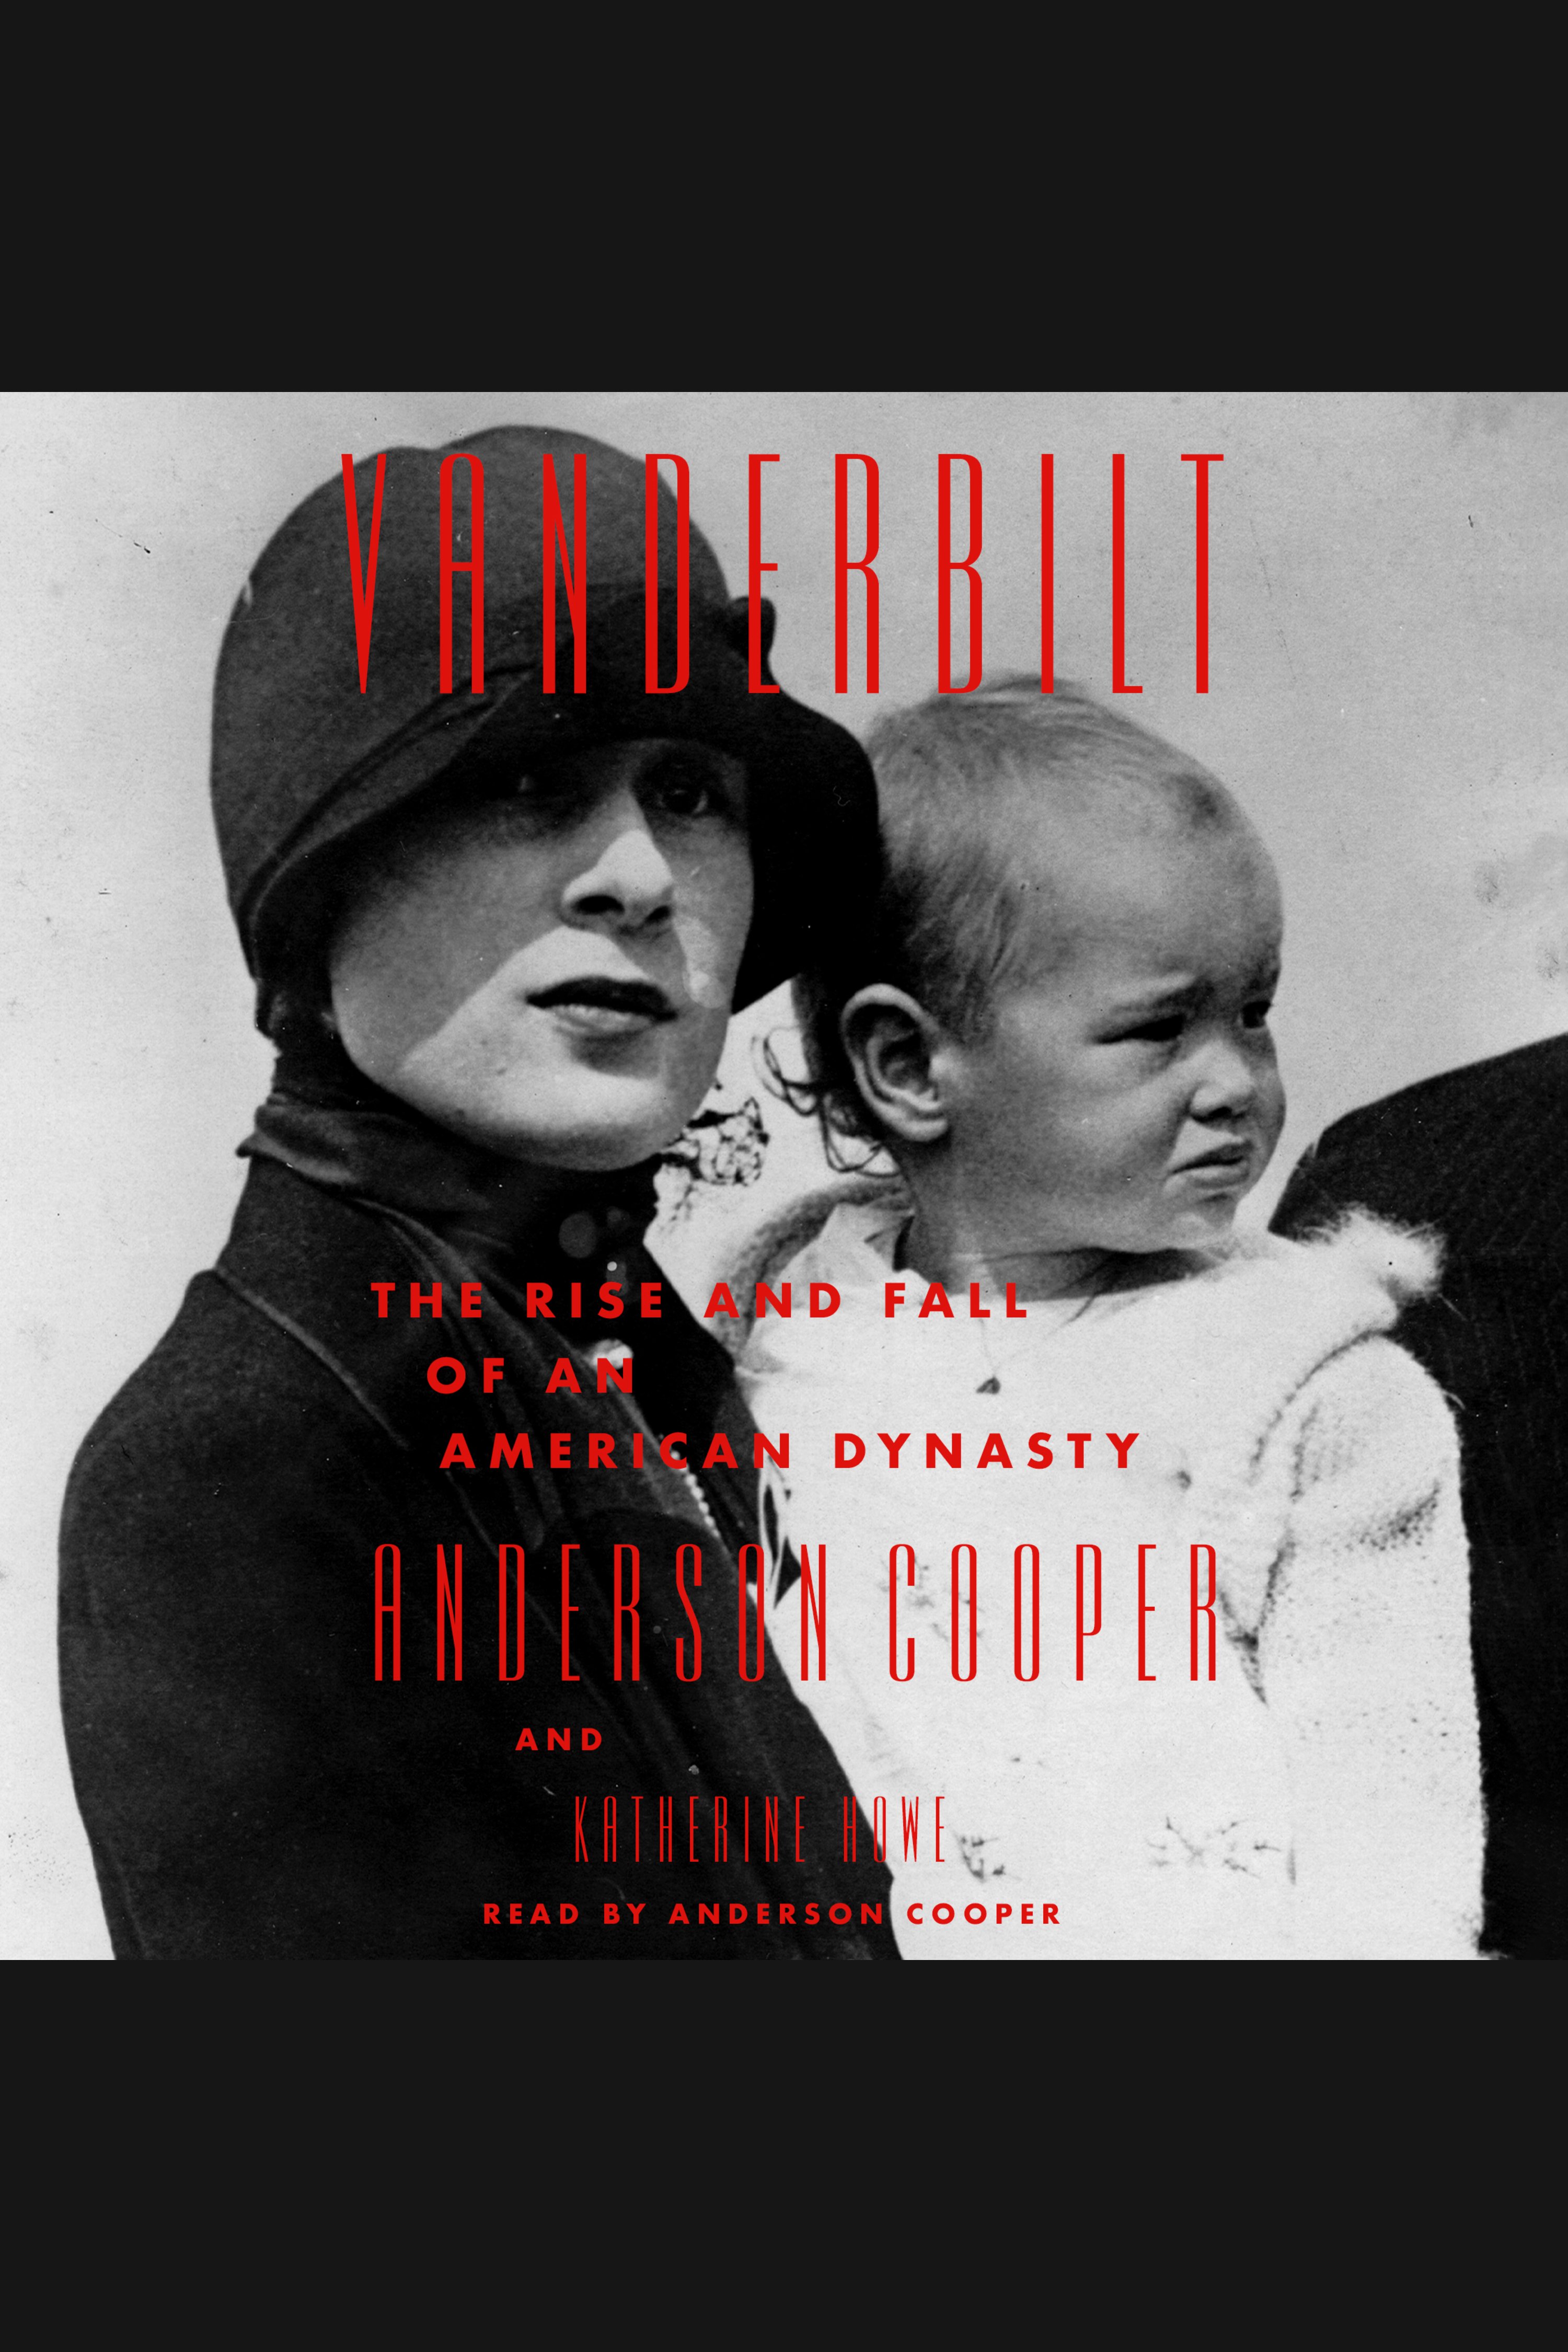 Cover image for Vanderbilt [electronic resource] : The Rise and Fall of an American Dynasty